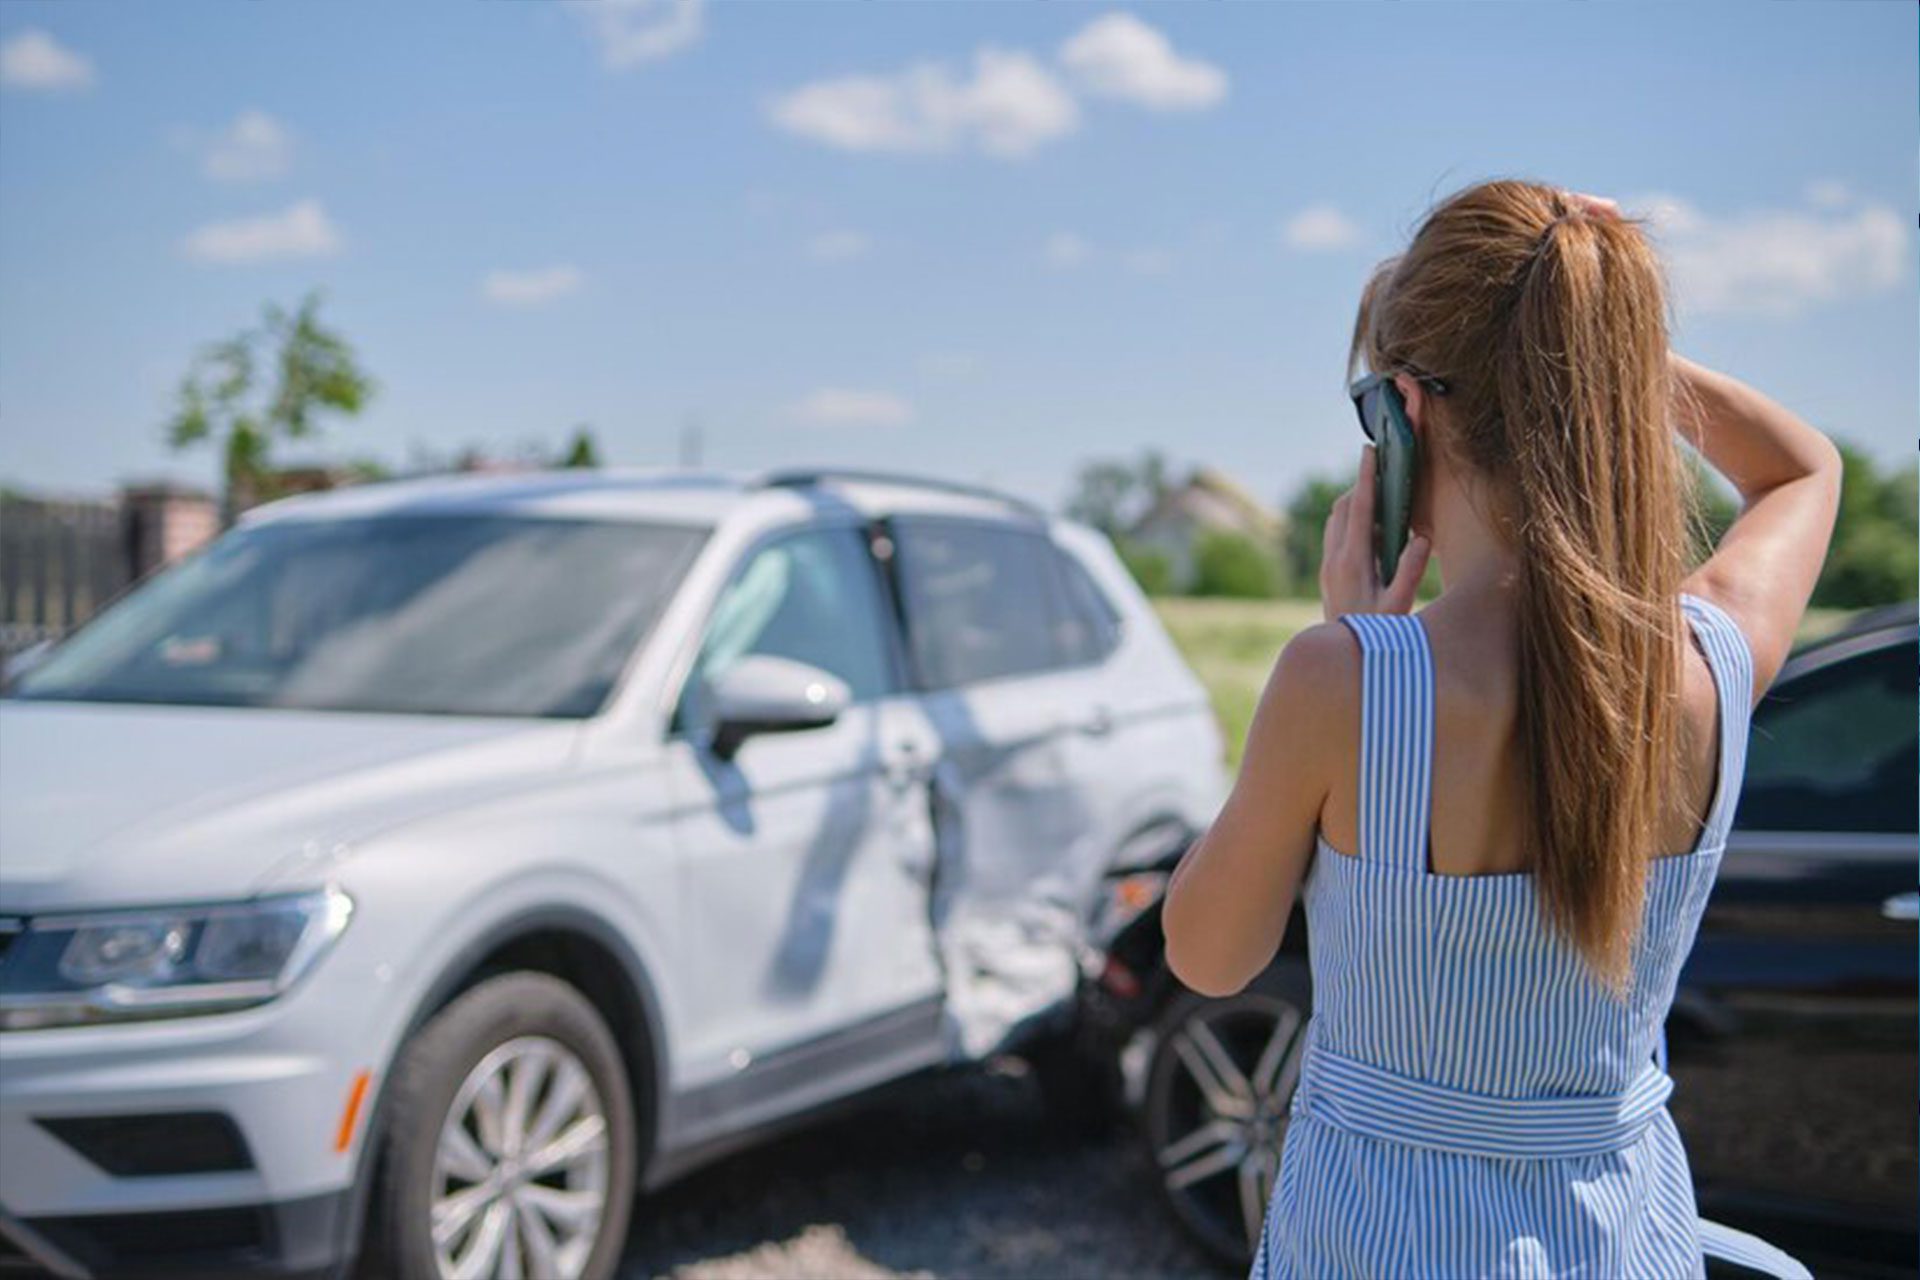 stressed-driver-talking-sellphone-roadside-near-her-smashed-vehicle-calling-emergency-service-help-after-car-accident-road-safety-insurance-concept_127089-24413